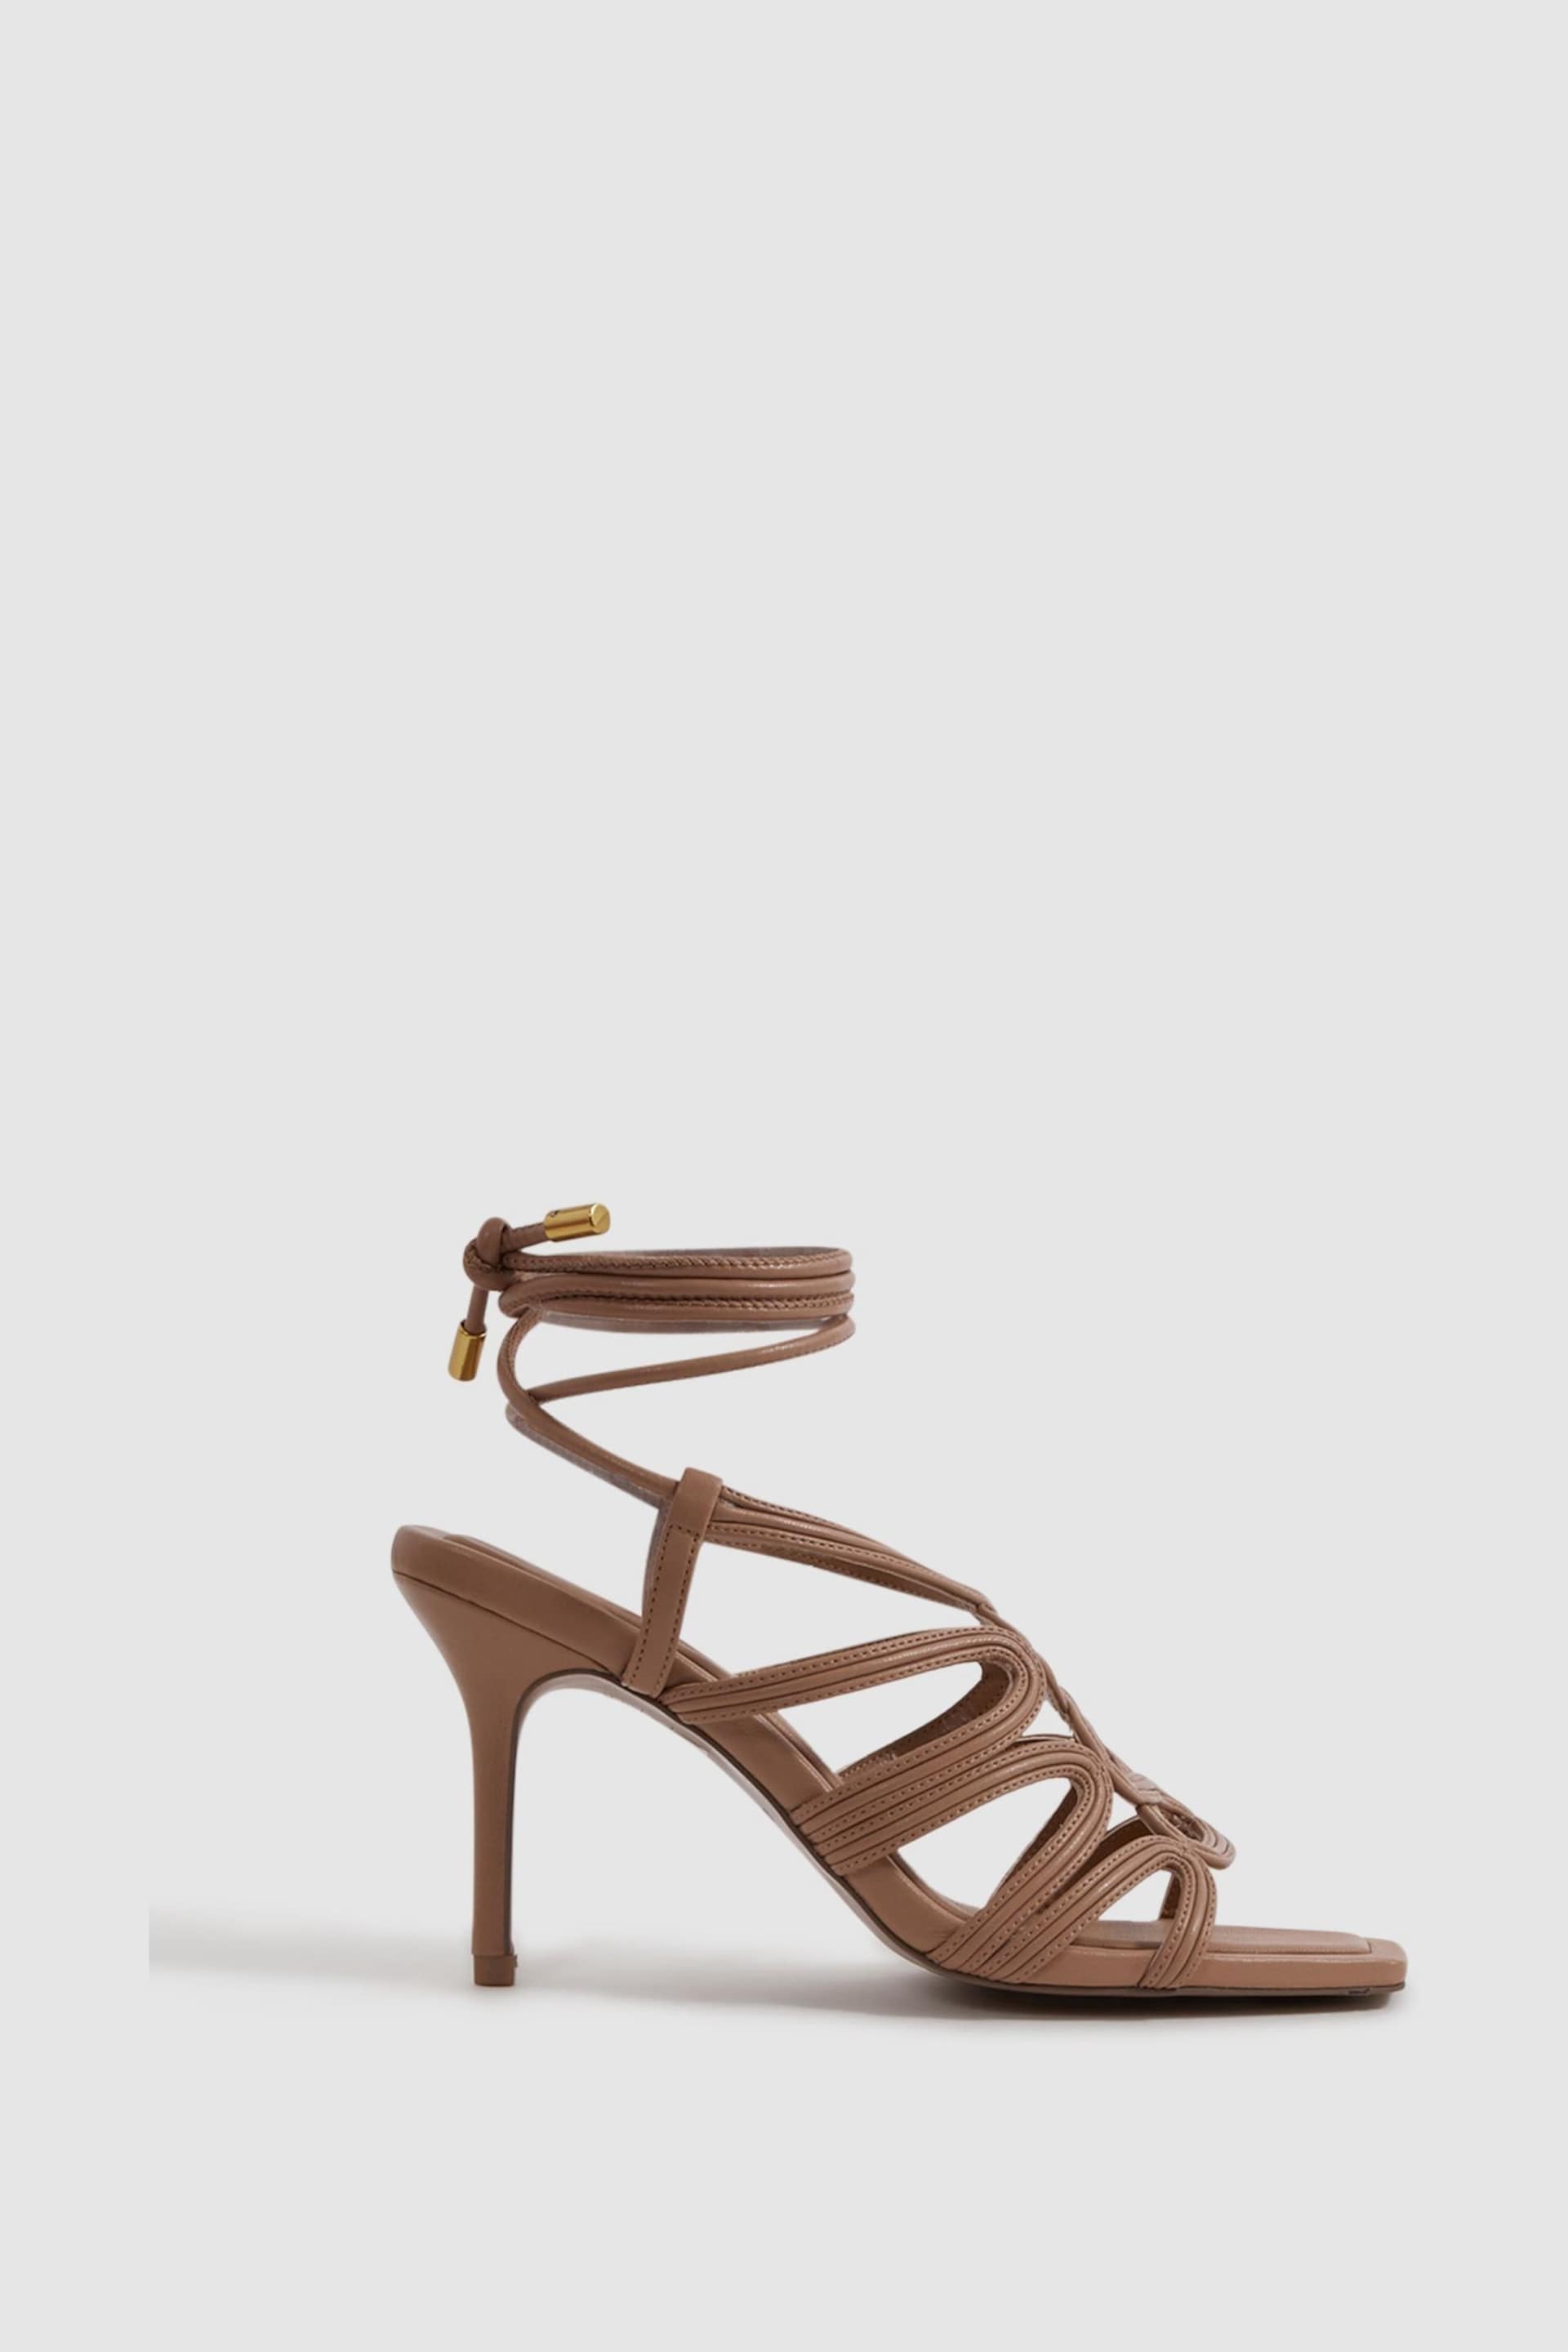 Reiss Nude Keira Strappy Open Toe Heeled Sandals - Image 1 of 5